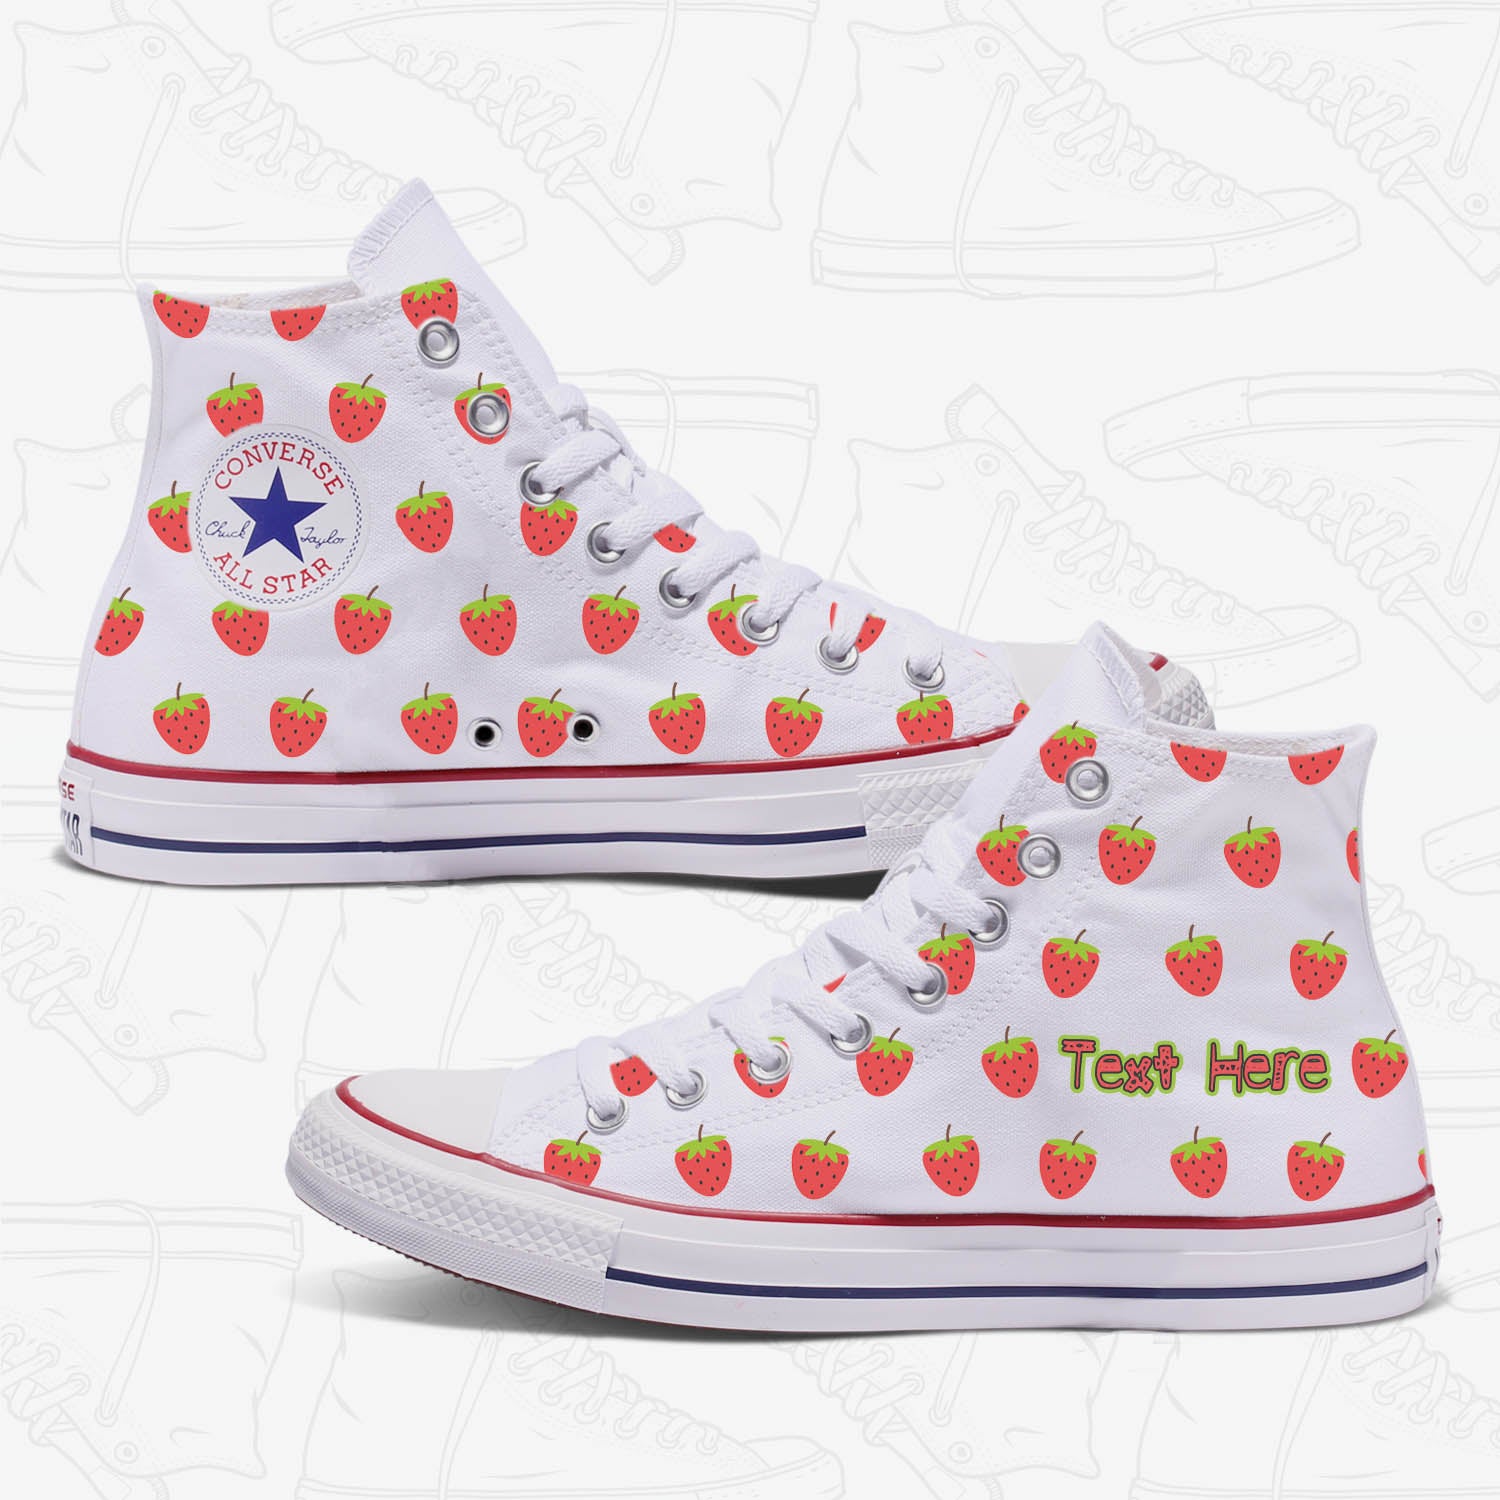 Converse Custom Strawberry Adult Shoes 